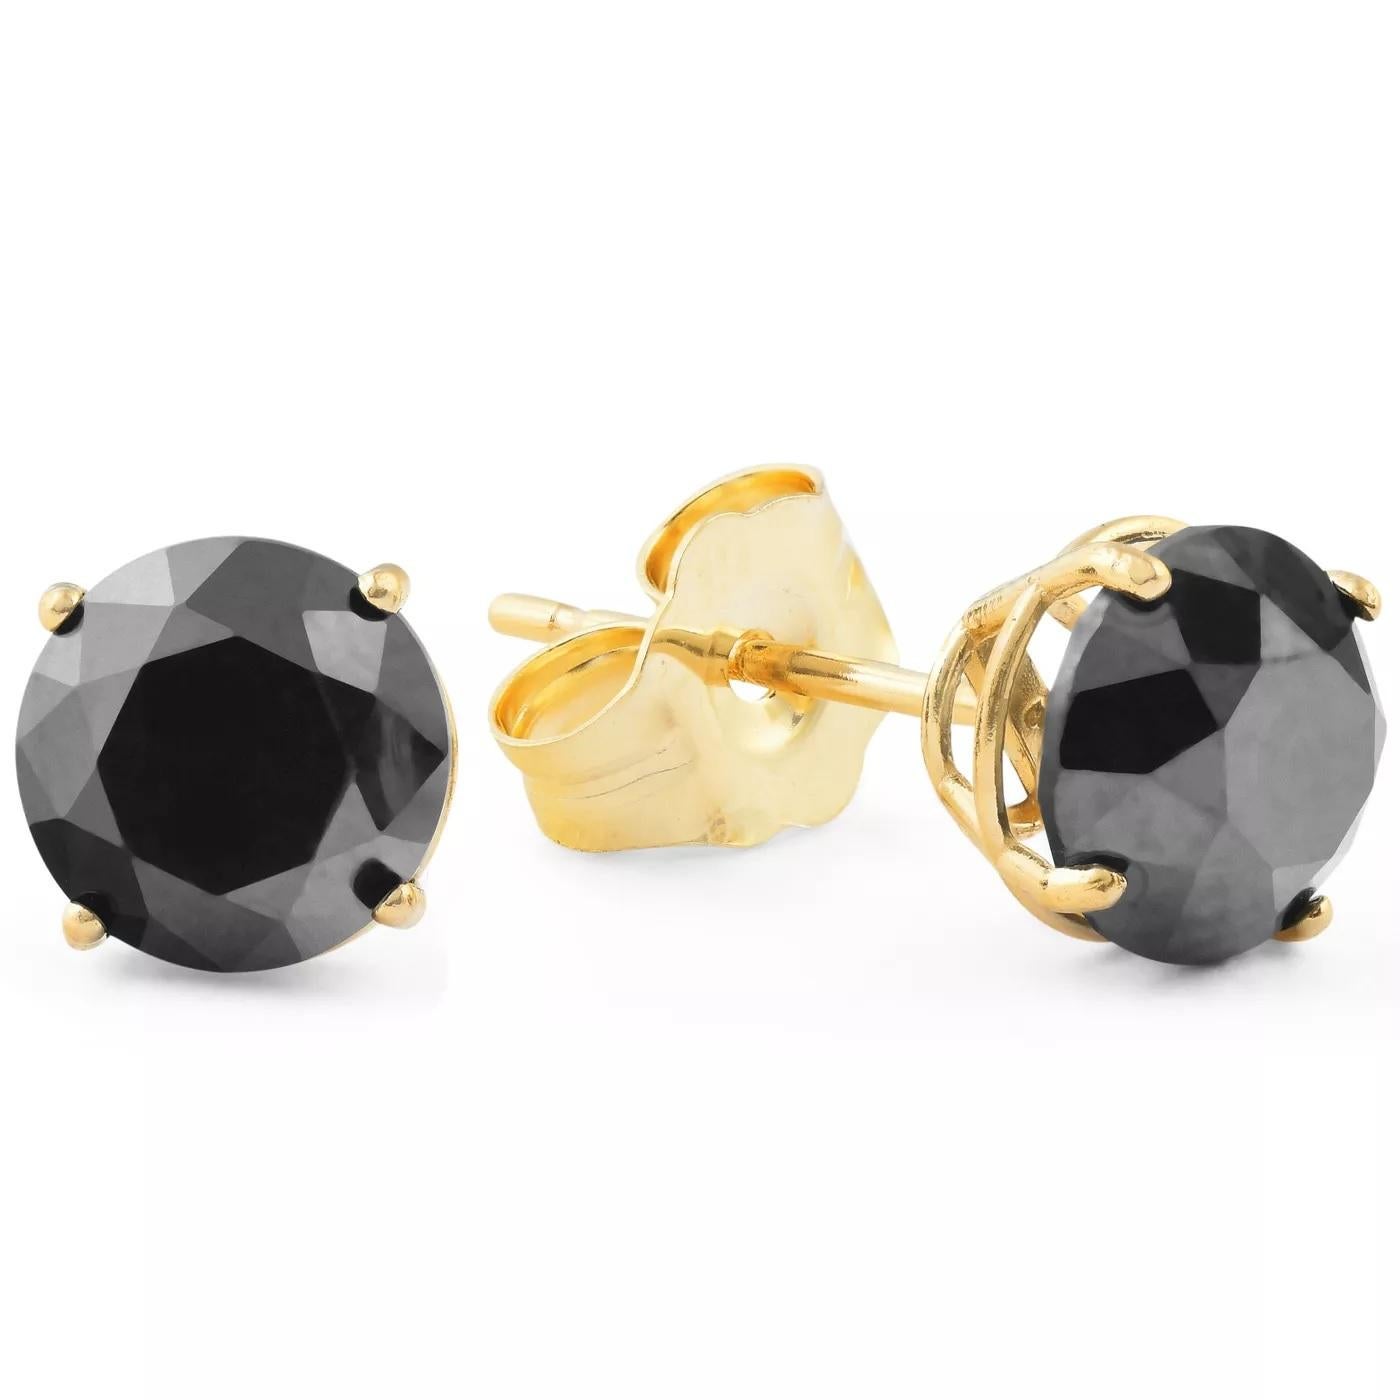 Alluring and refined, these diamond stud earrings are sure to be noticed. Created in 14 K yellow gold, the earring showcases a beguiling 1.92 carat natural black diamond solitaire measuring 7.20 x 7.21 x 5.21mm. Exquisitely made and Captivating with